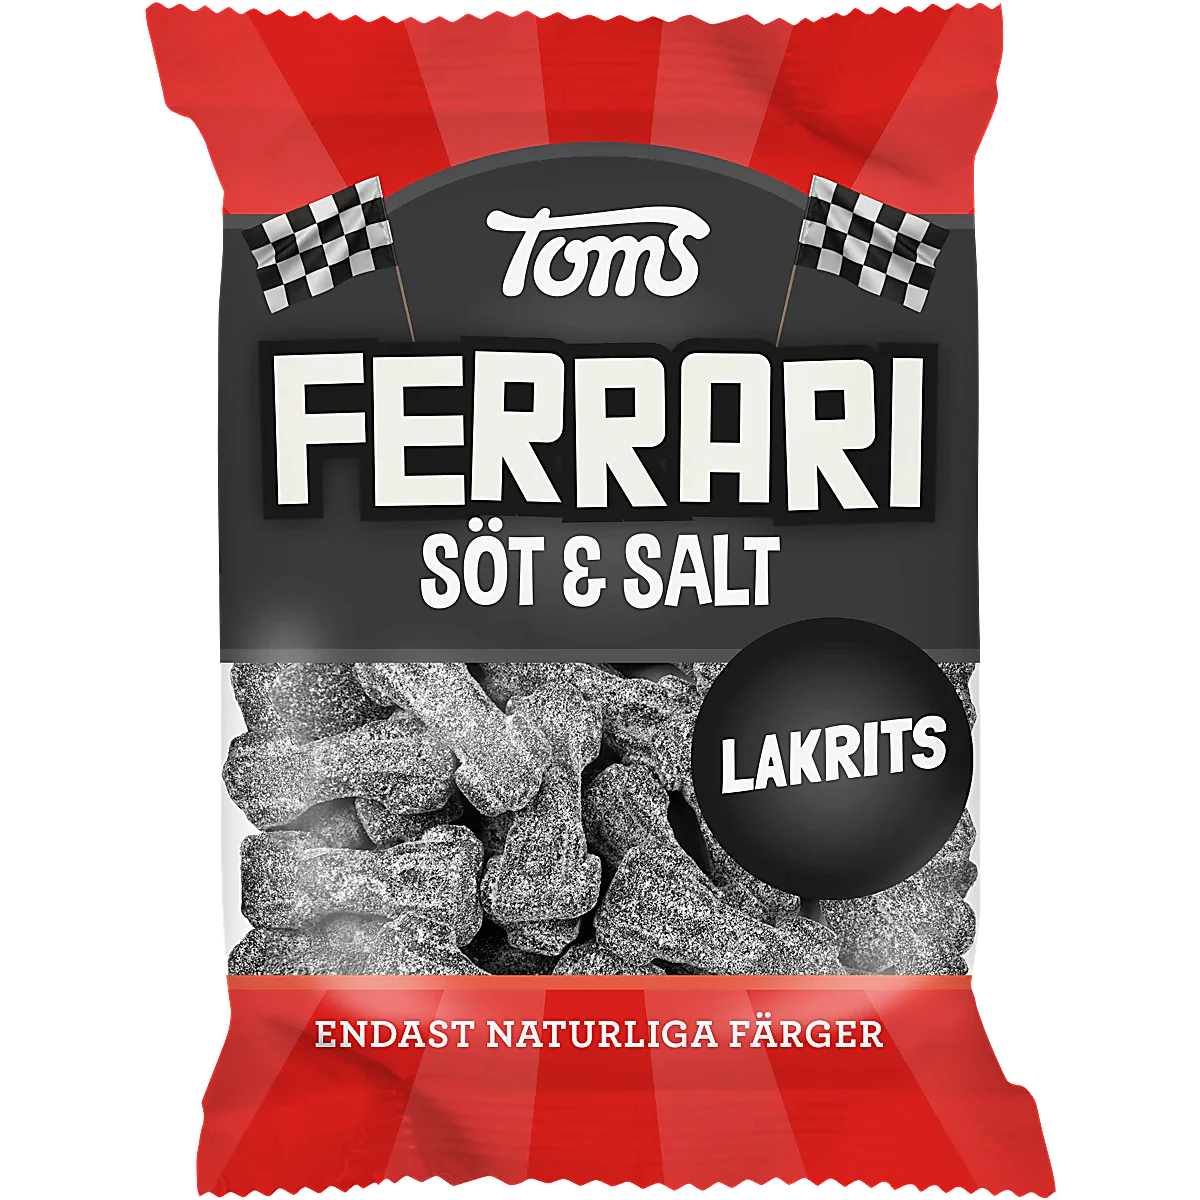 Toms Ferrari Sweet & Salty by Swedish Candy Store